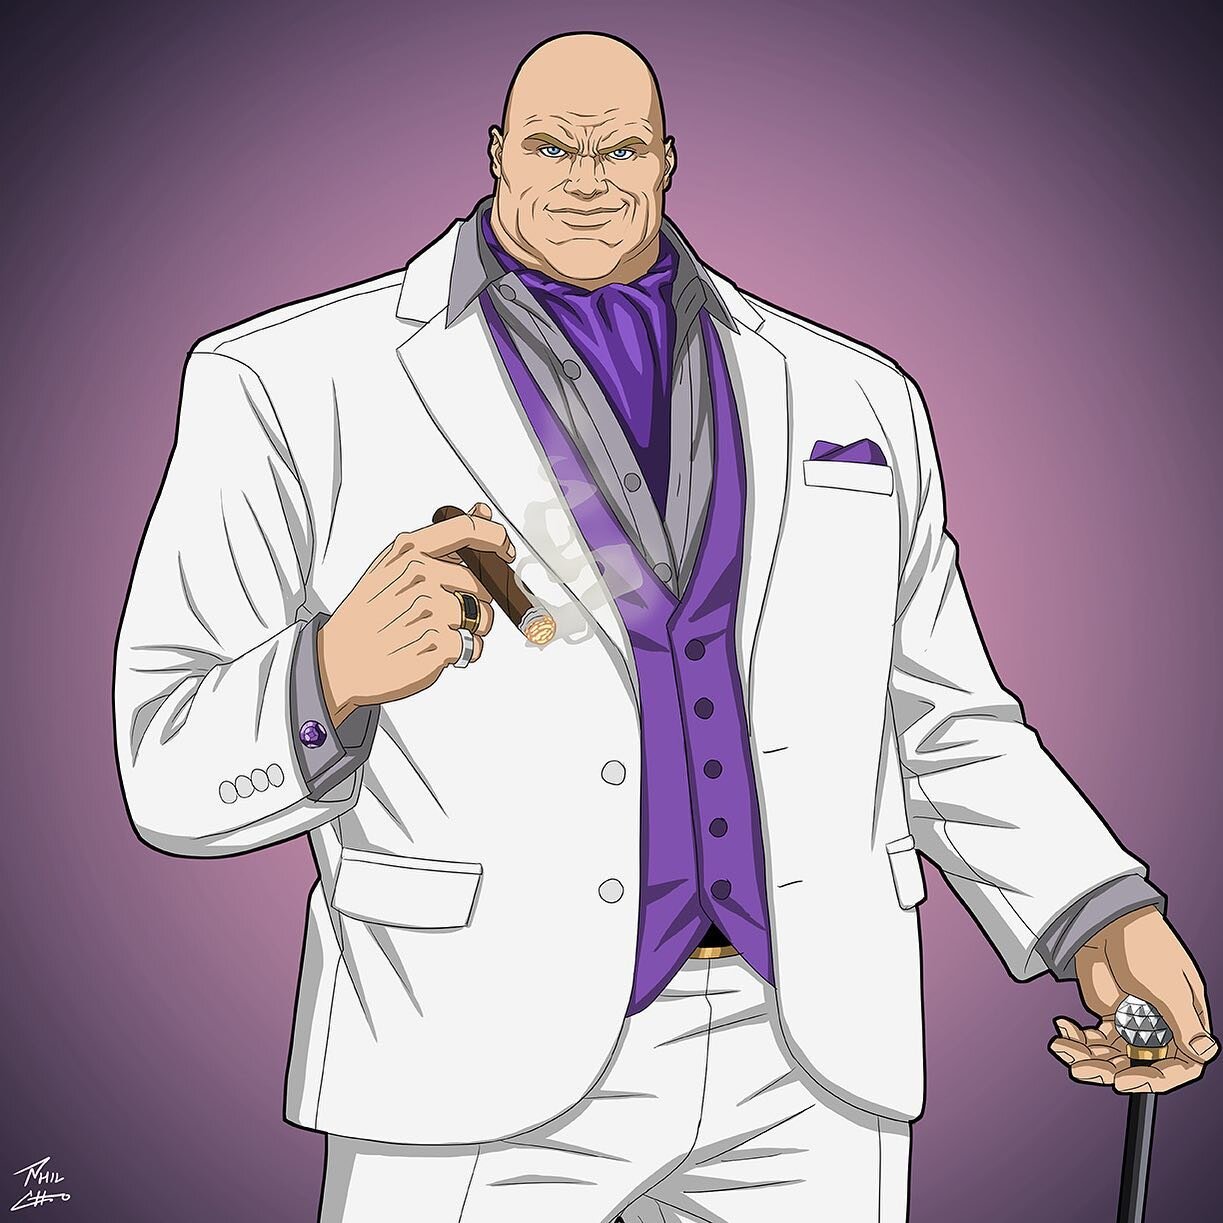 &quot;Wilson Fisk&quot; - sponsored by the Earth-27 Fan Community for Roysovitch's Earth-27M Project.
Character belongs to Marvel Comics, but has been reimagined for Earth-27M.
Art by Phil Cho.

#wilsonfisk #kingpin #earth27m #roysovitch #commission 